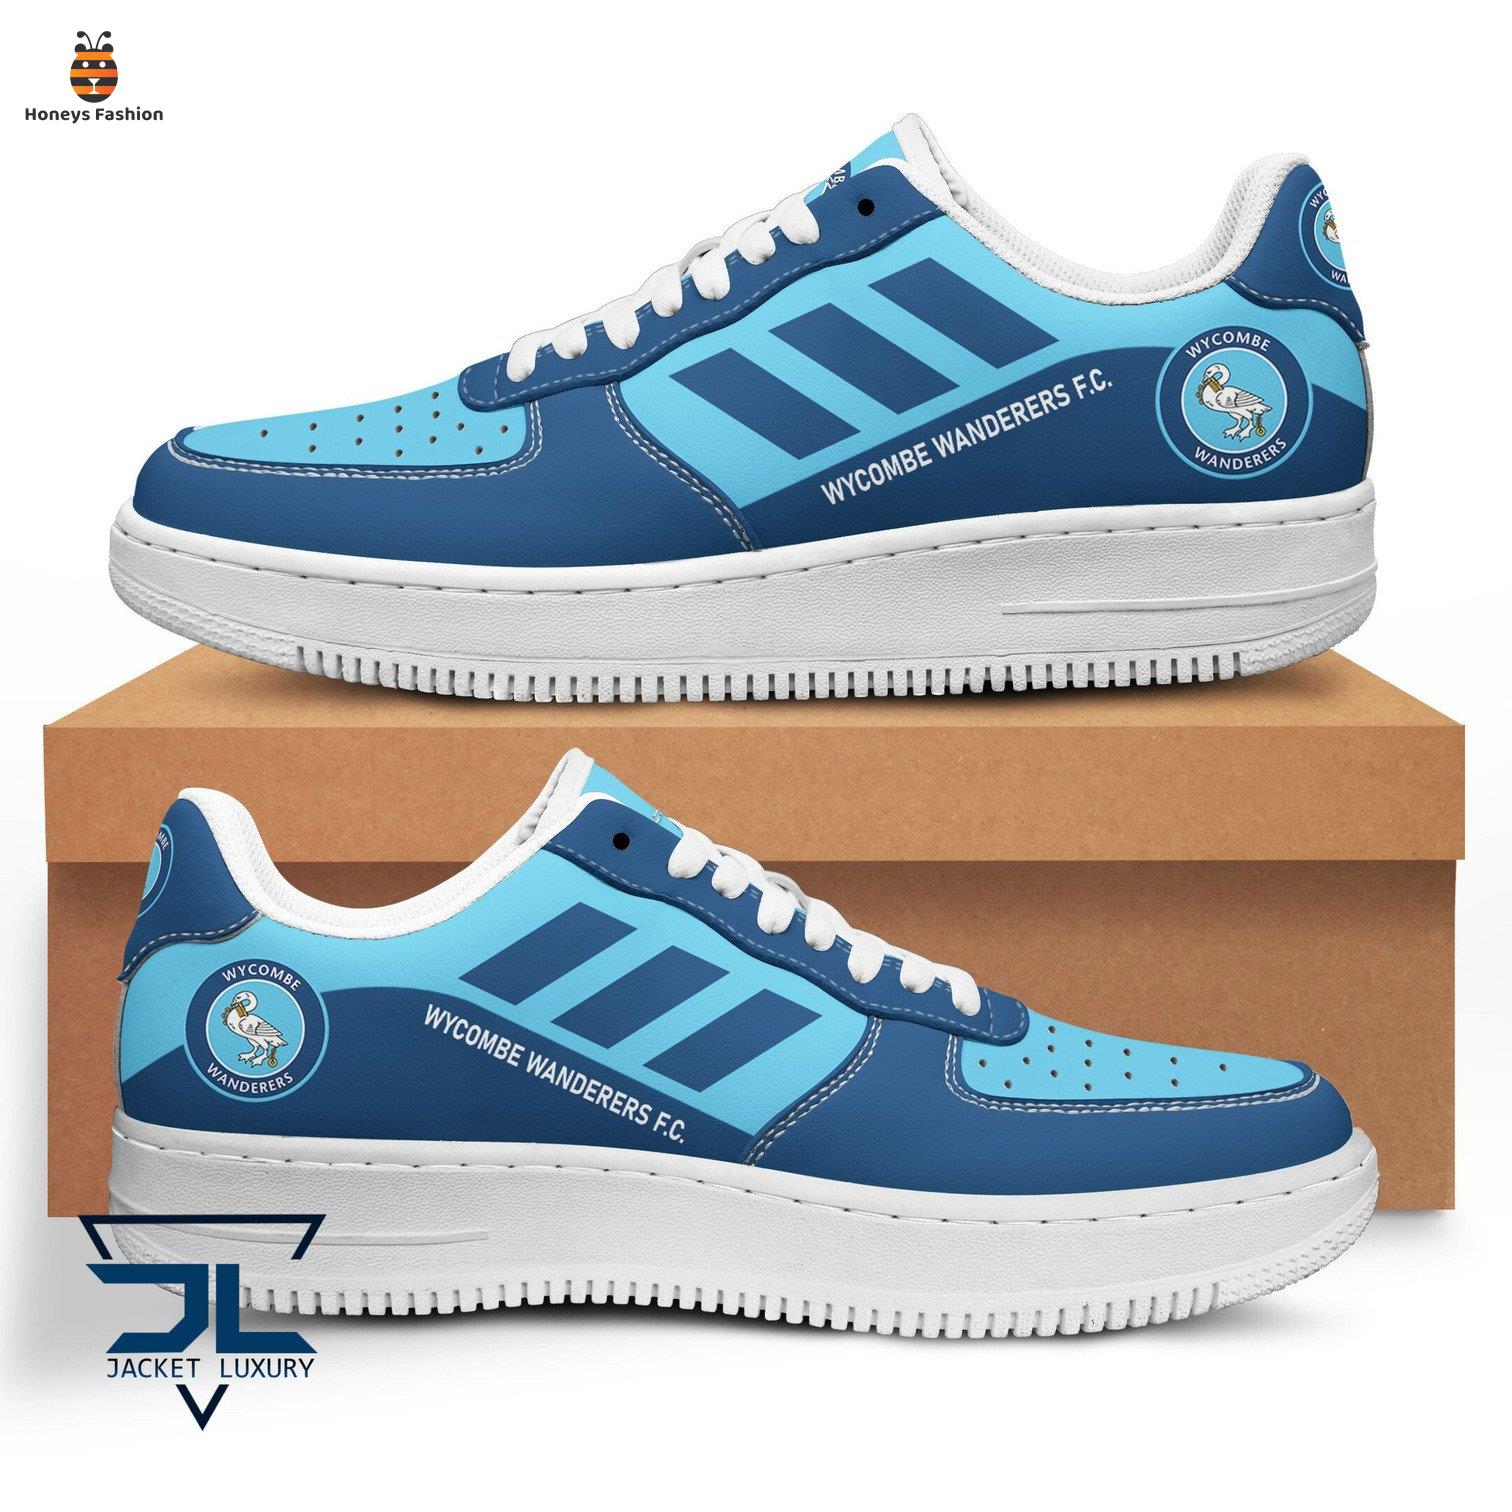 Wycombe Wanderers F.C air force 1 shoes